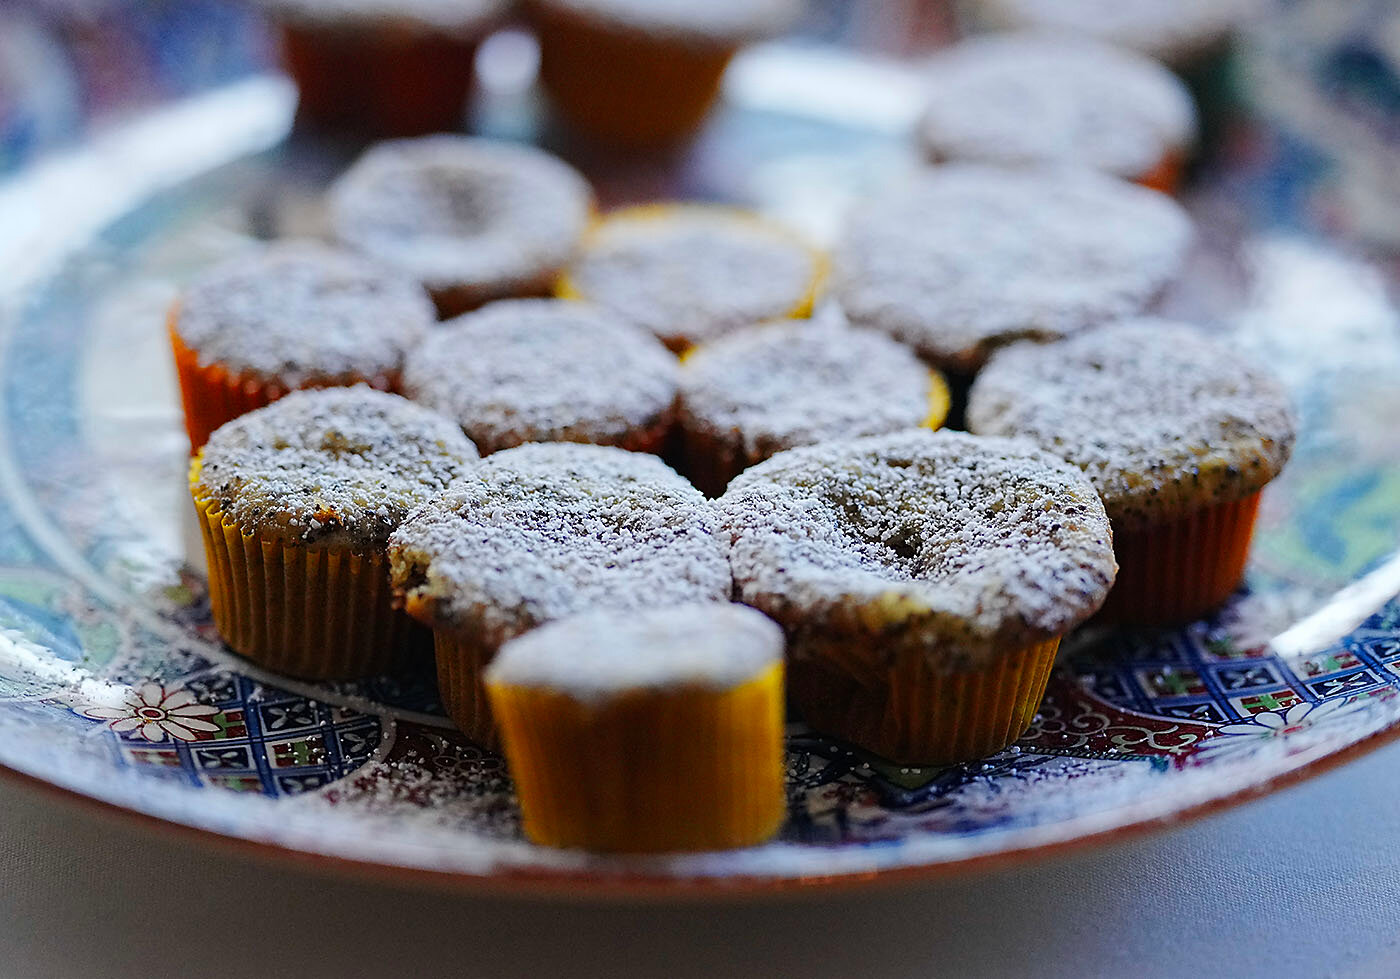 Hungarian poppy seed mini cakes made by Celia Harms, of Warwick.